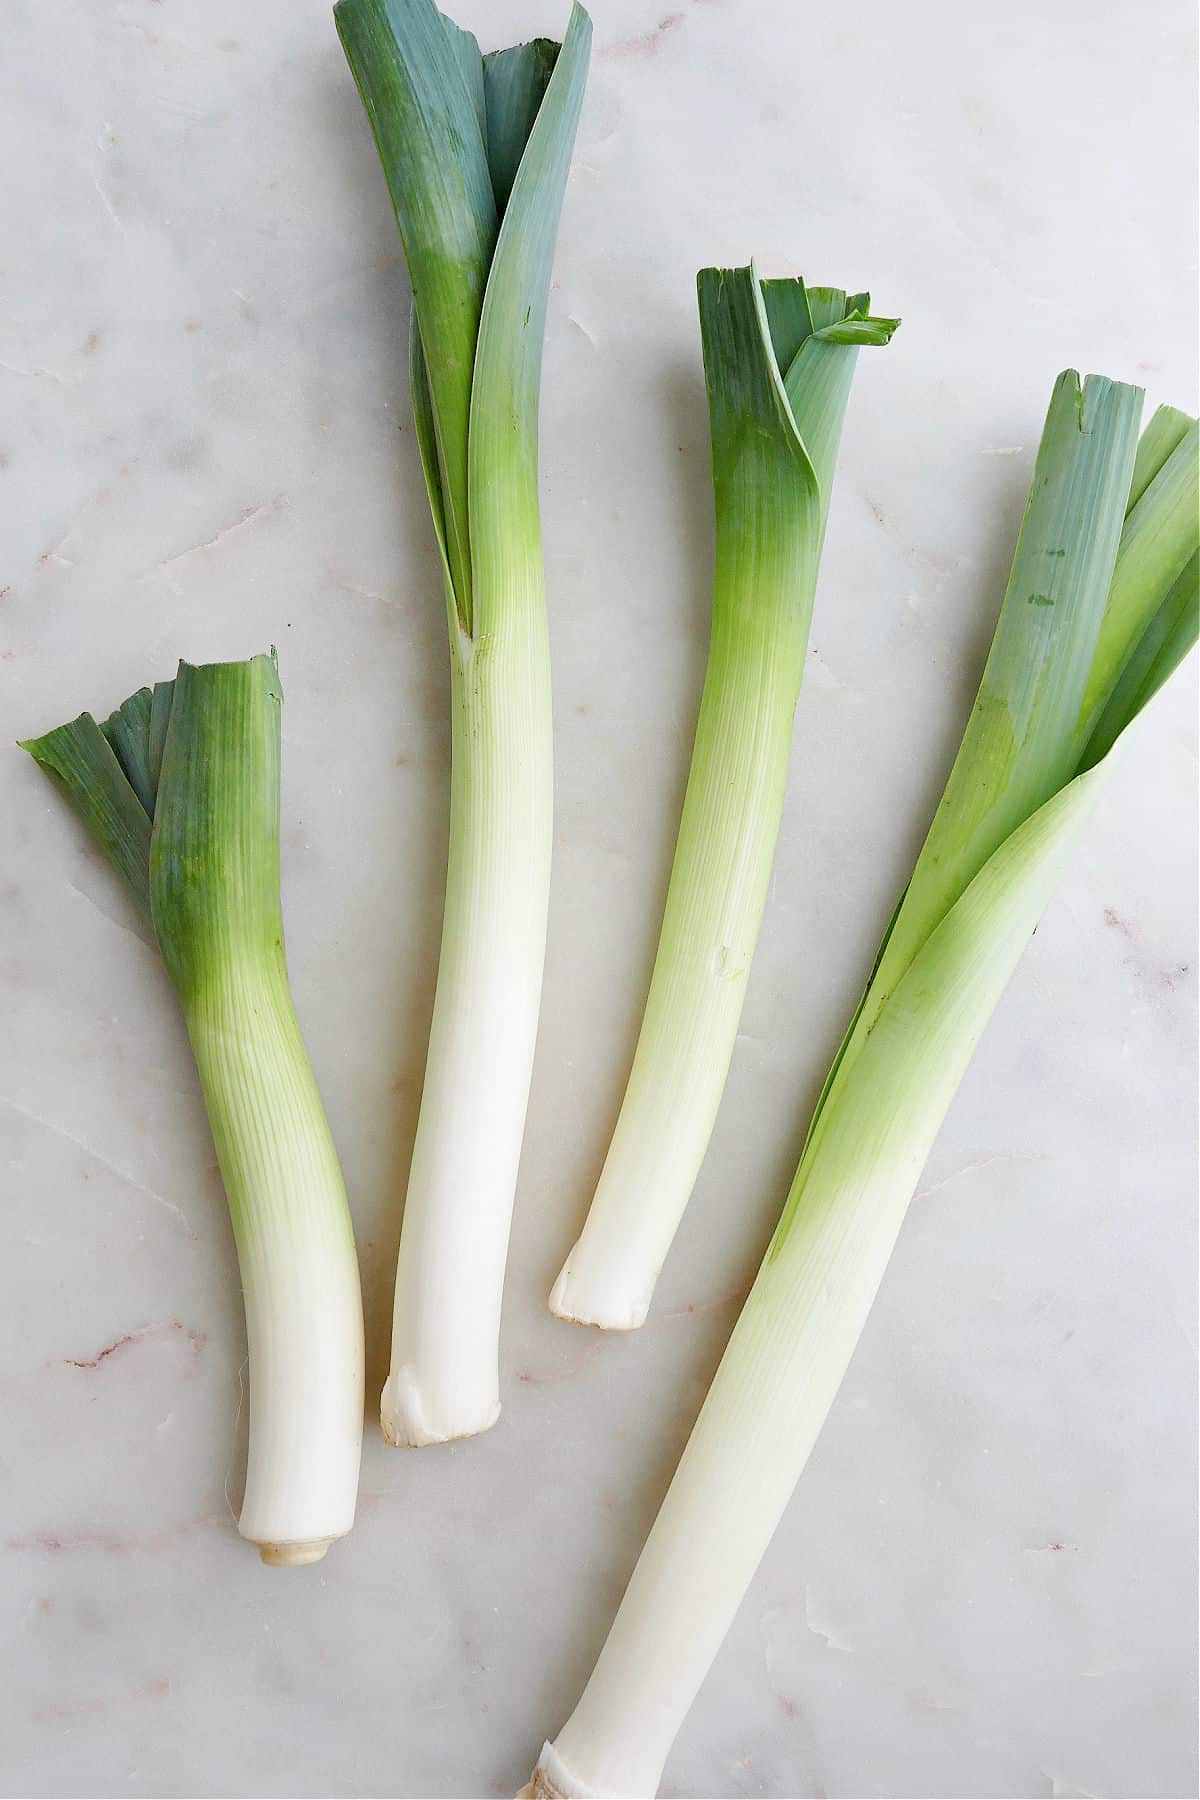 four leeks spread out next to each other on a simple white countertop